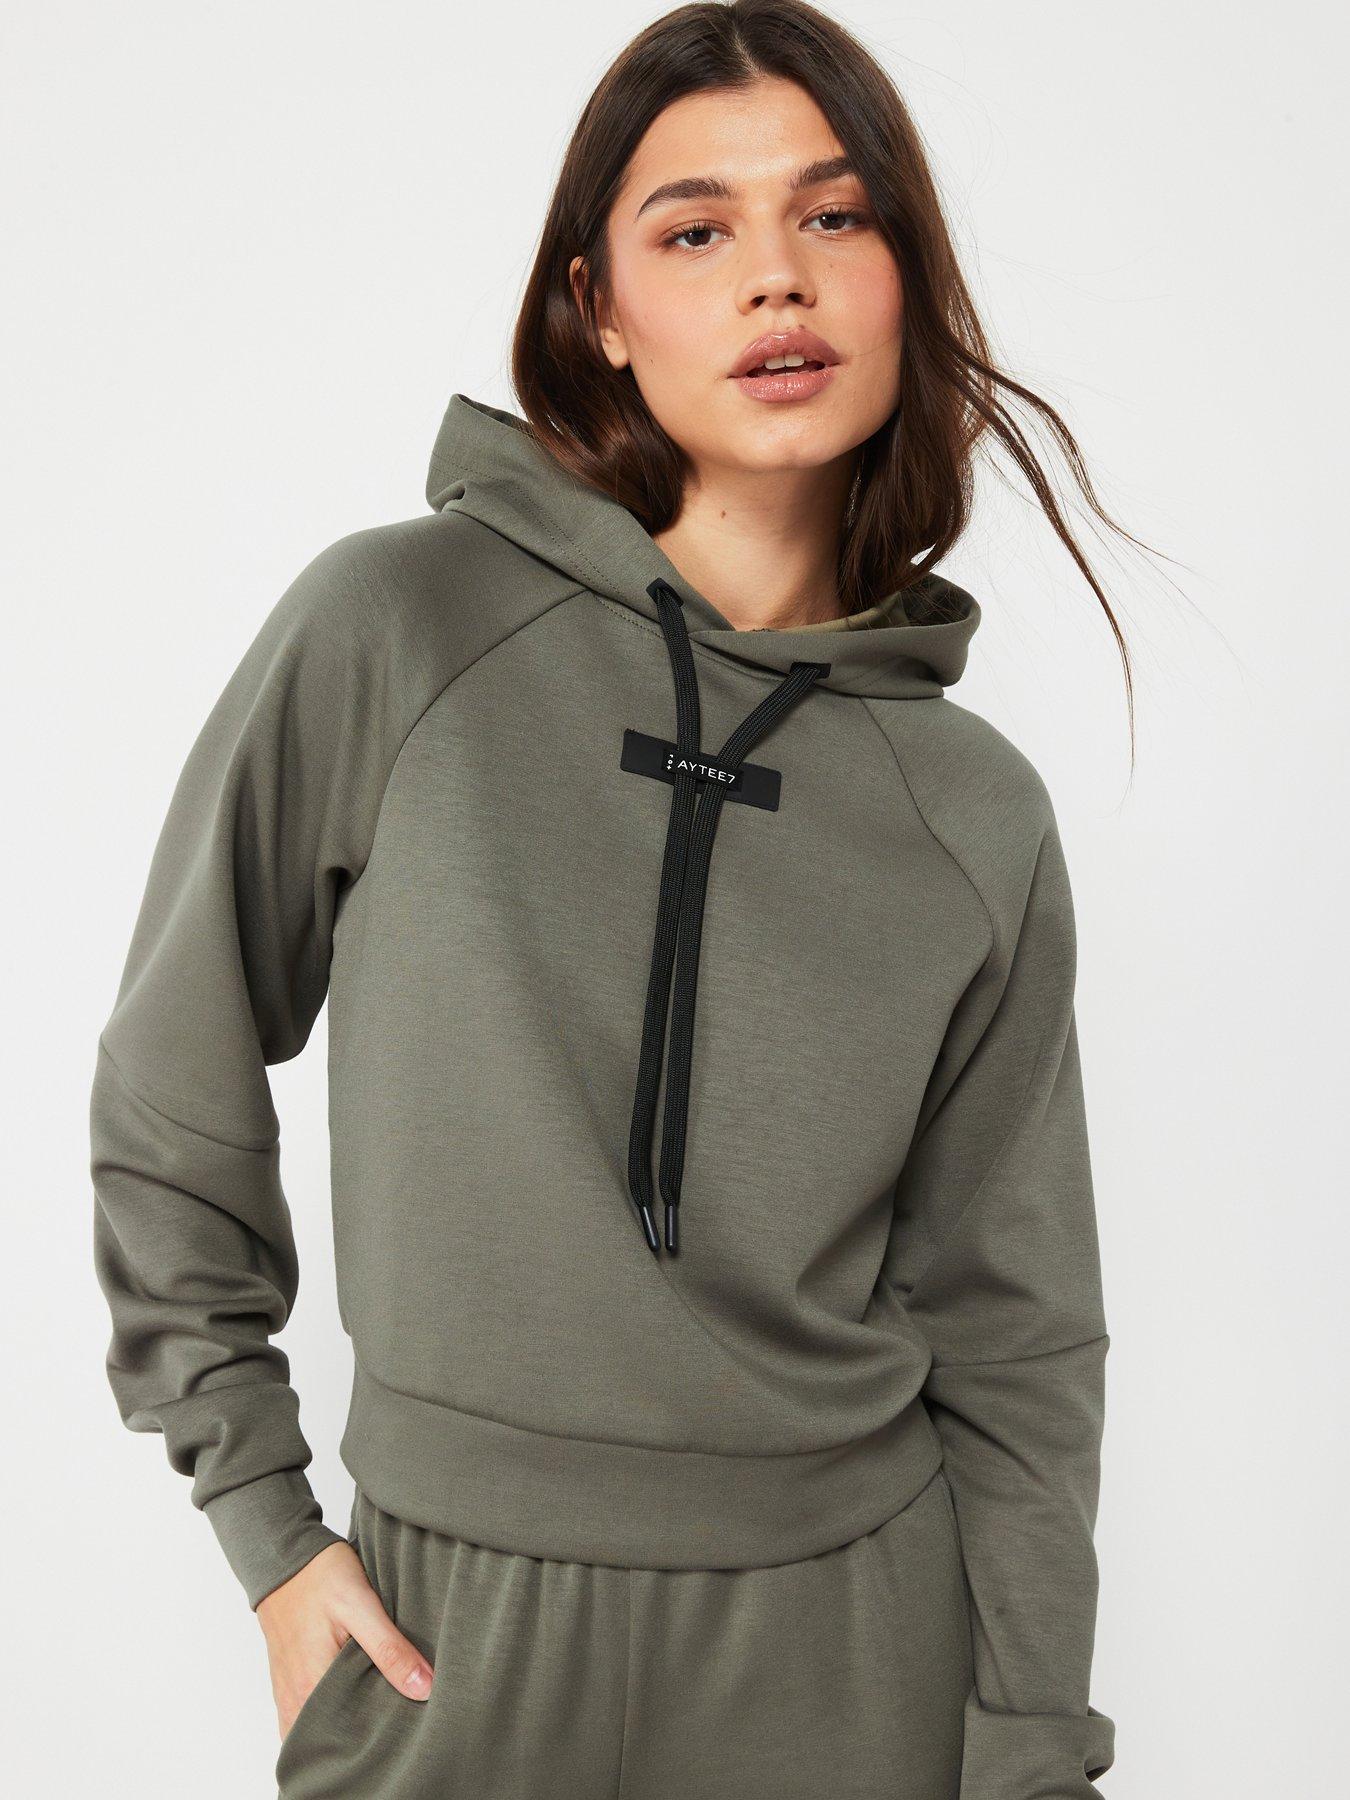 Women Drawstring Hoodie Oversized Hoodie Sweatshirts Women's Hoodies Women  Casual Hoodies Long Sleeve Letter Printing Drawstring Pullover For Autumn  Winter 